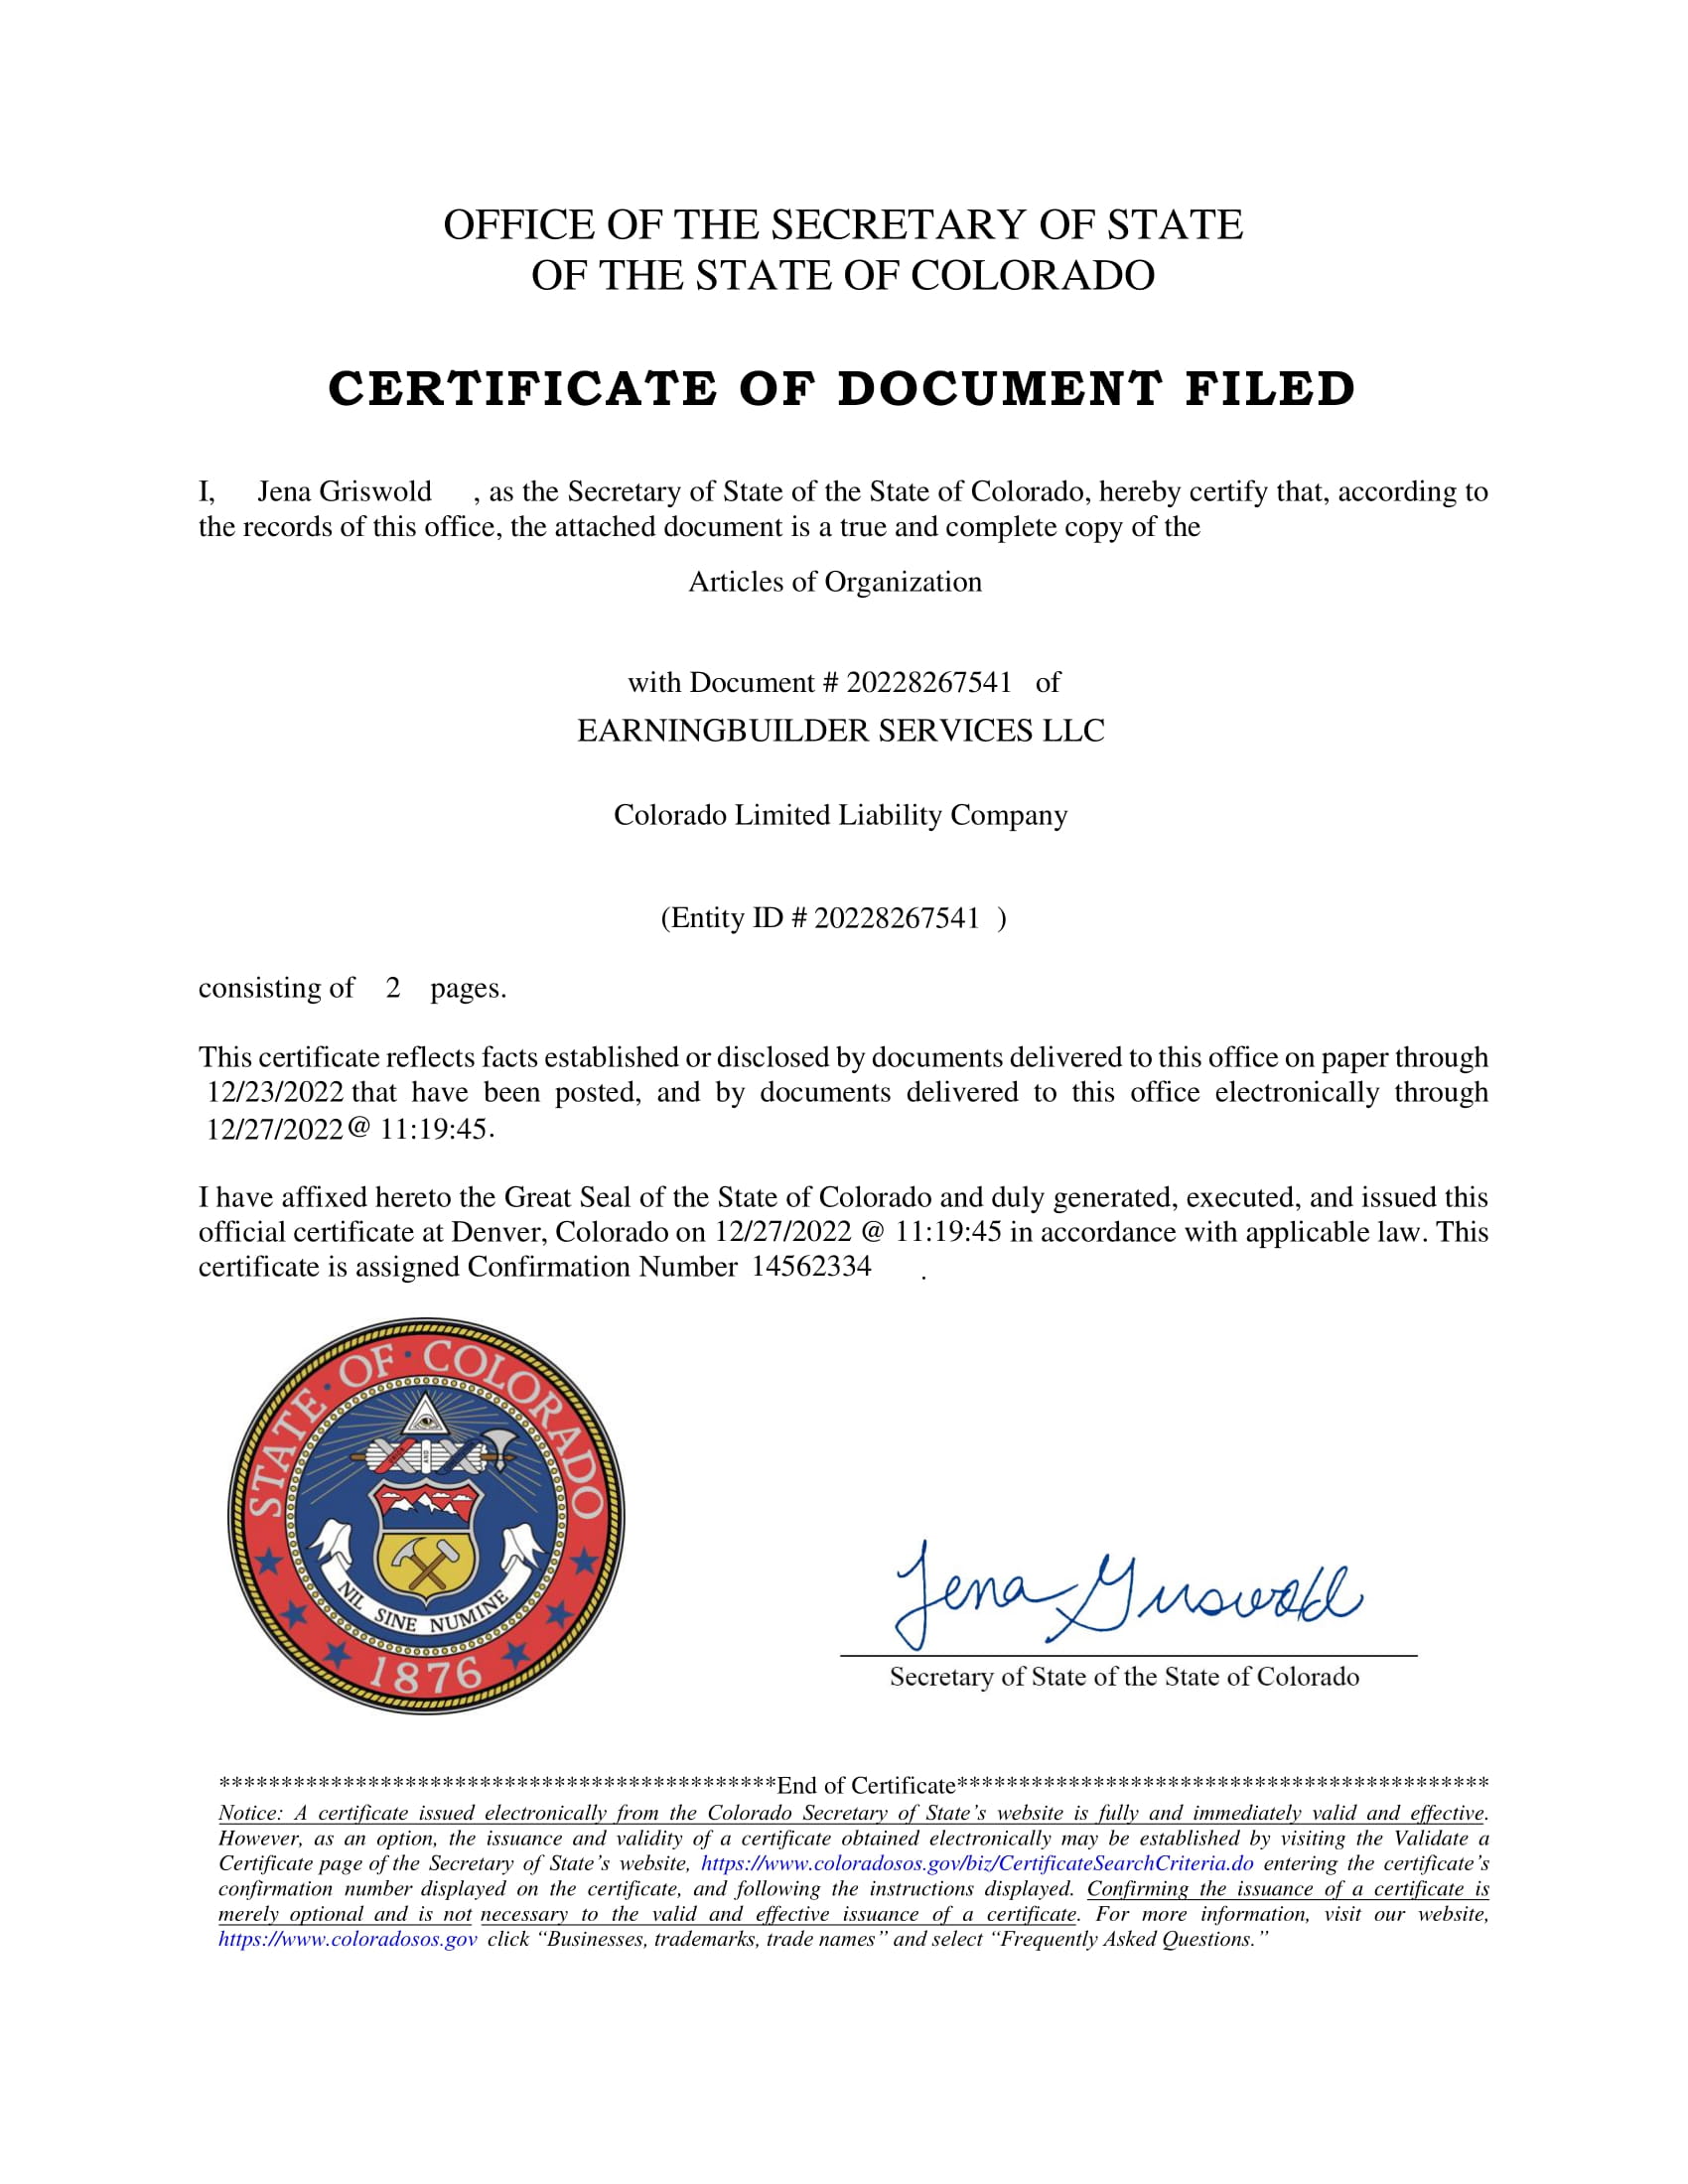 Certificate of Document